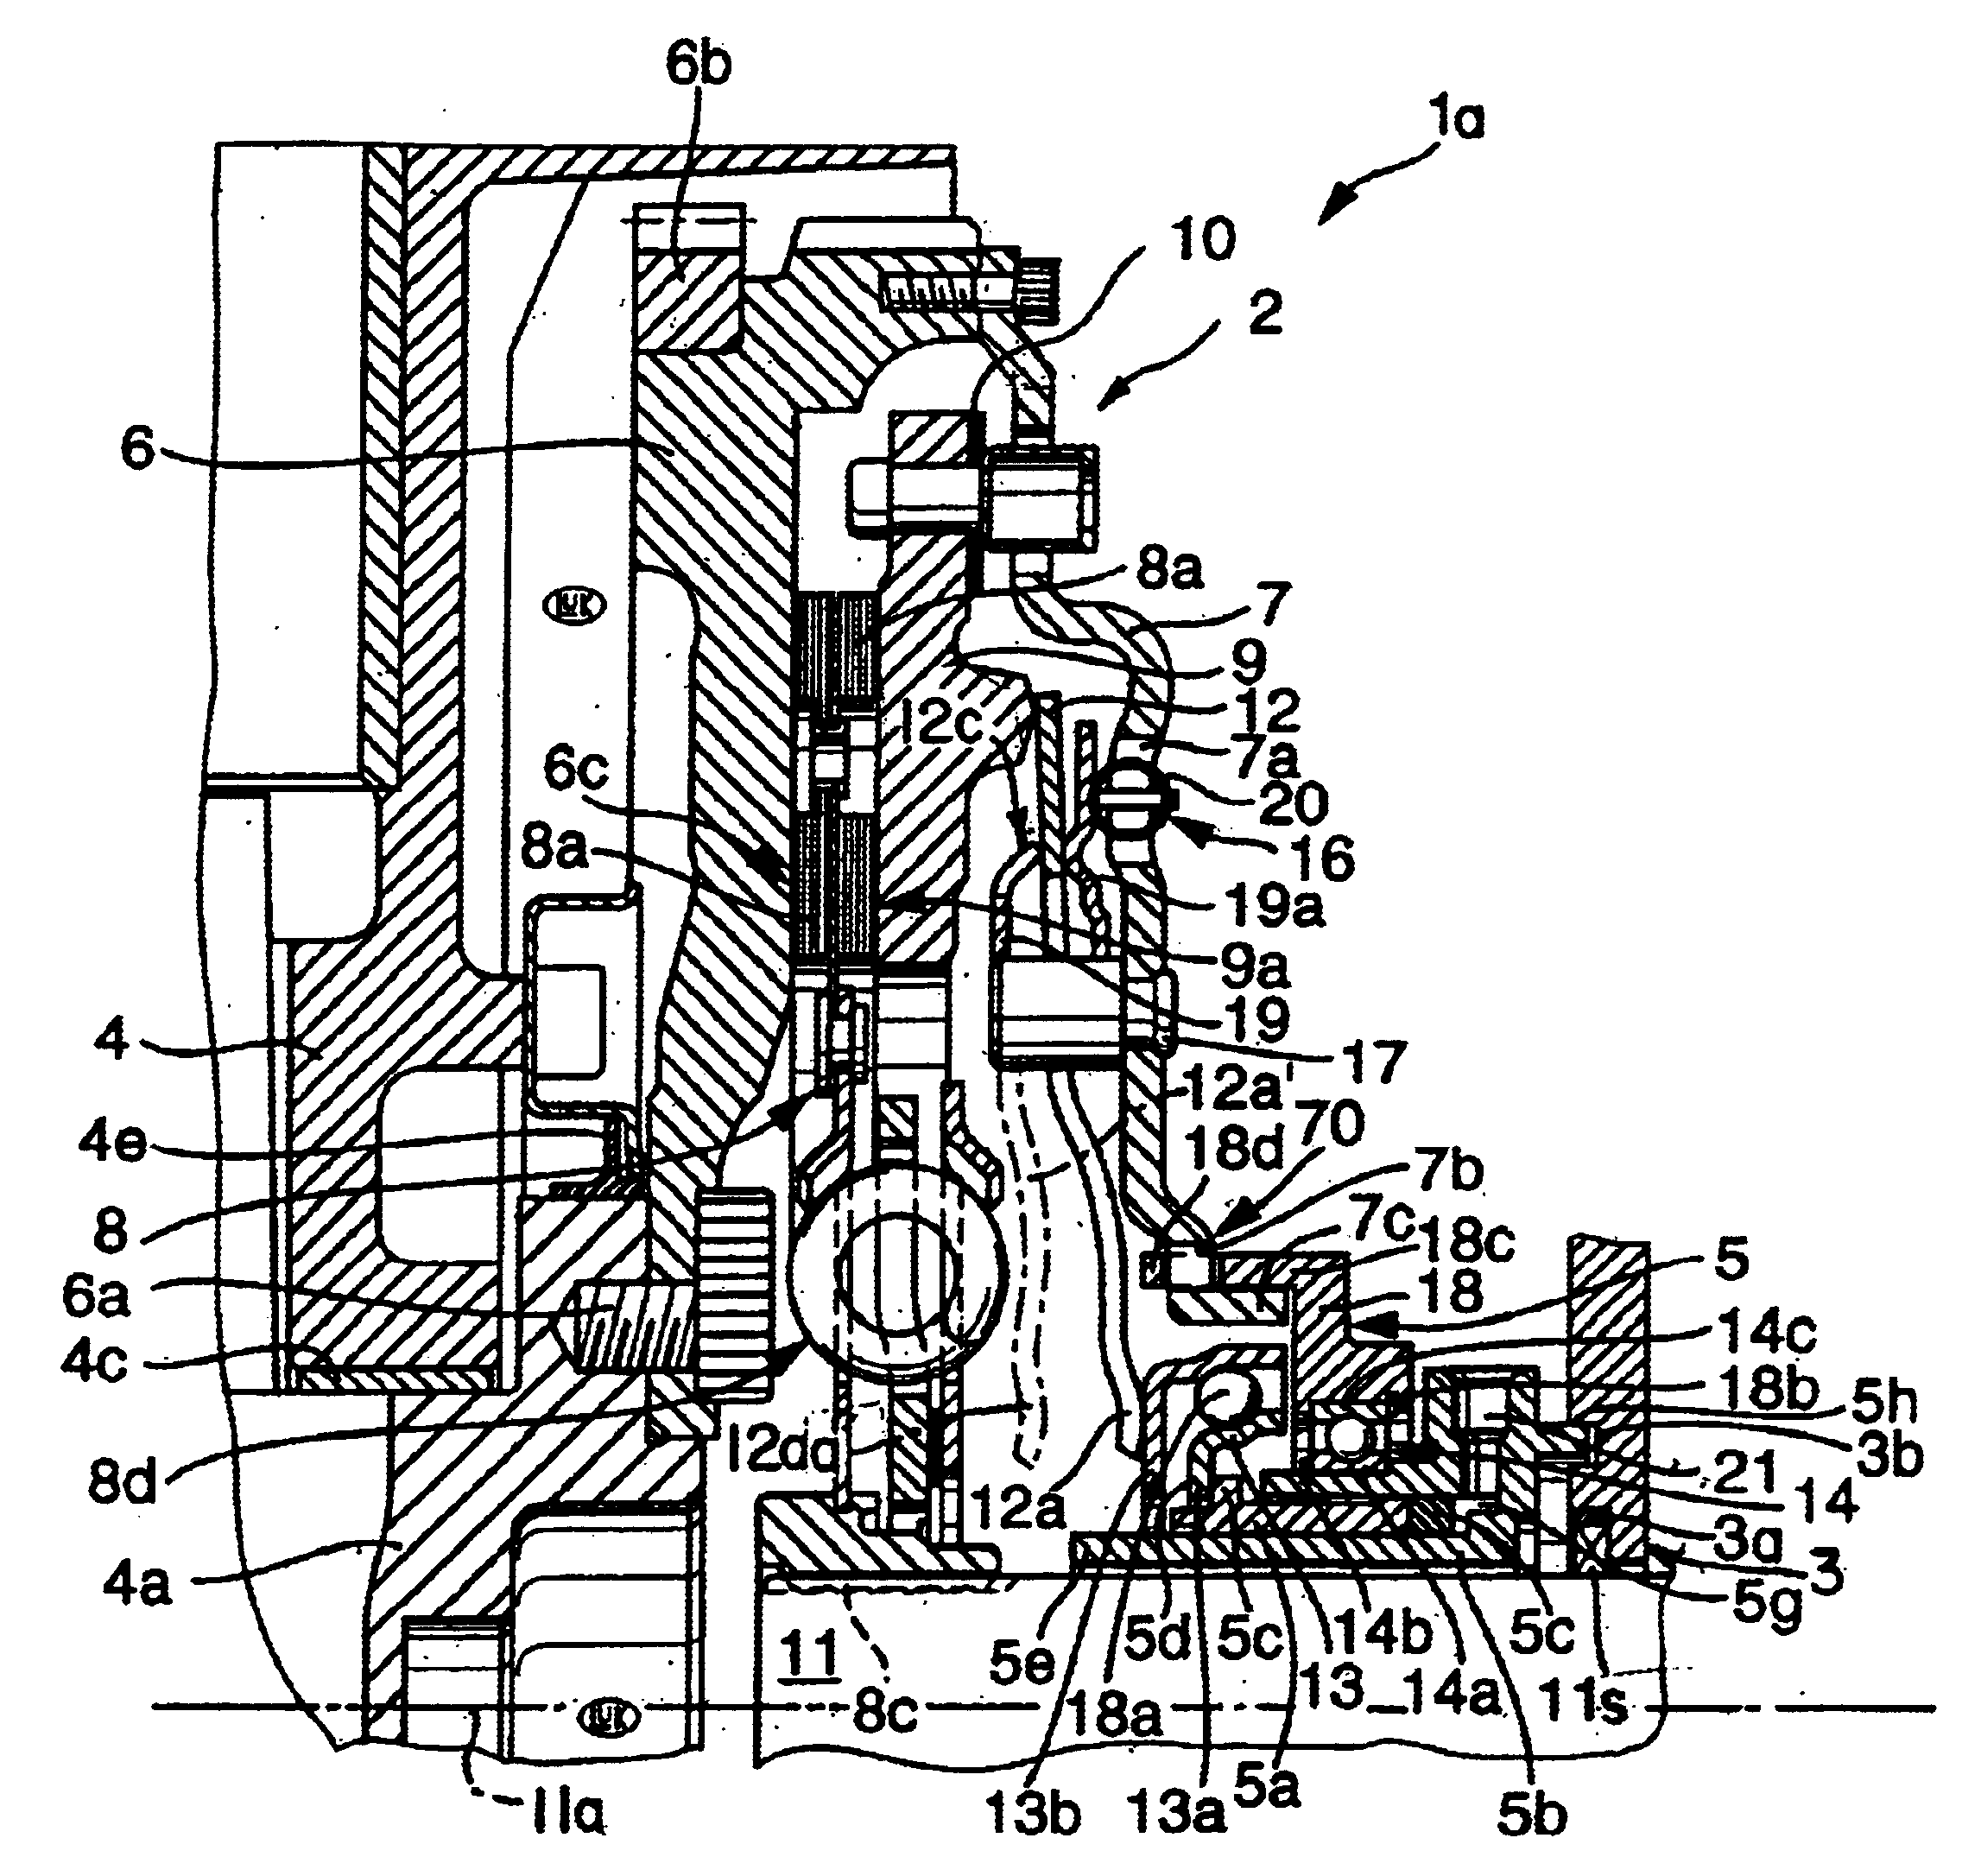 Power train for use in motor vehicles and the like